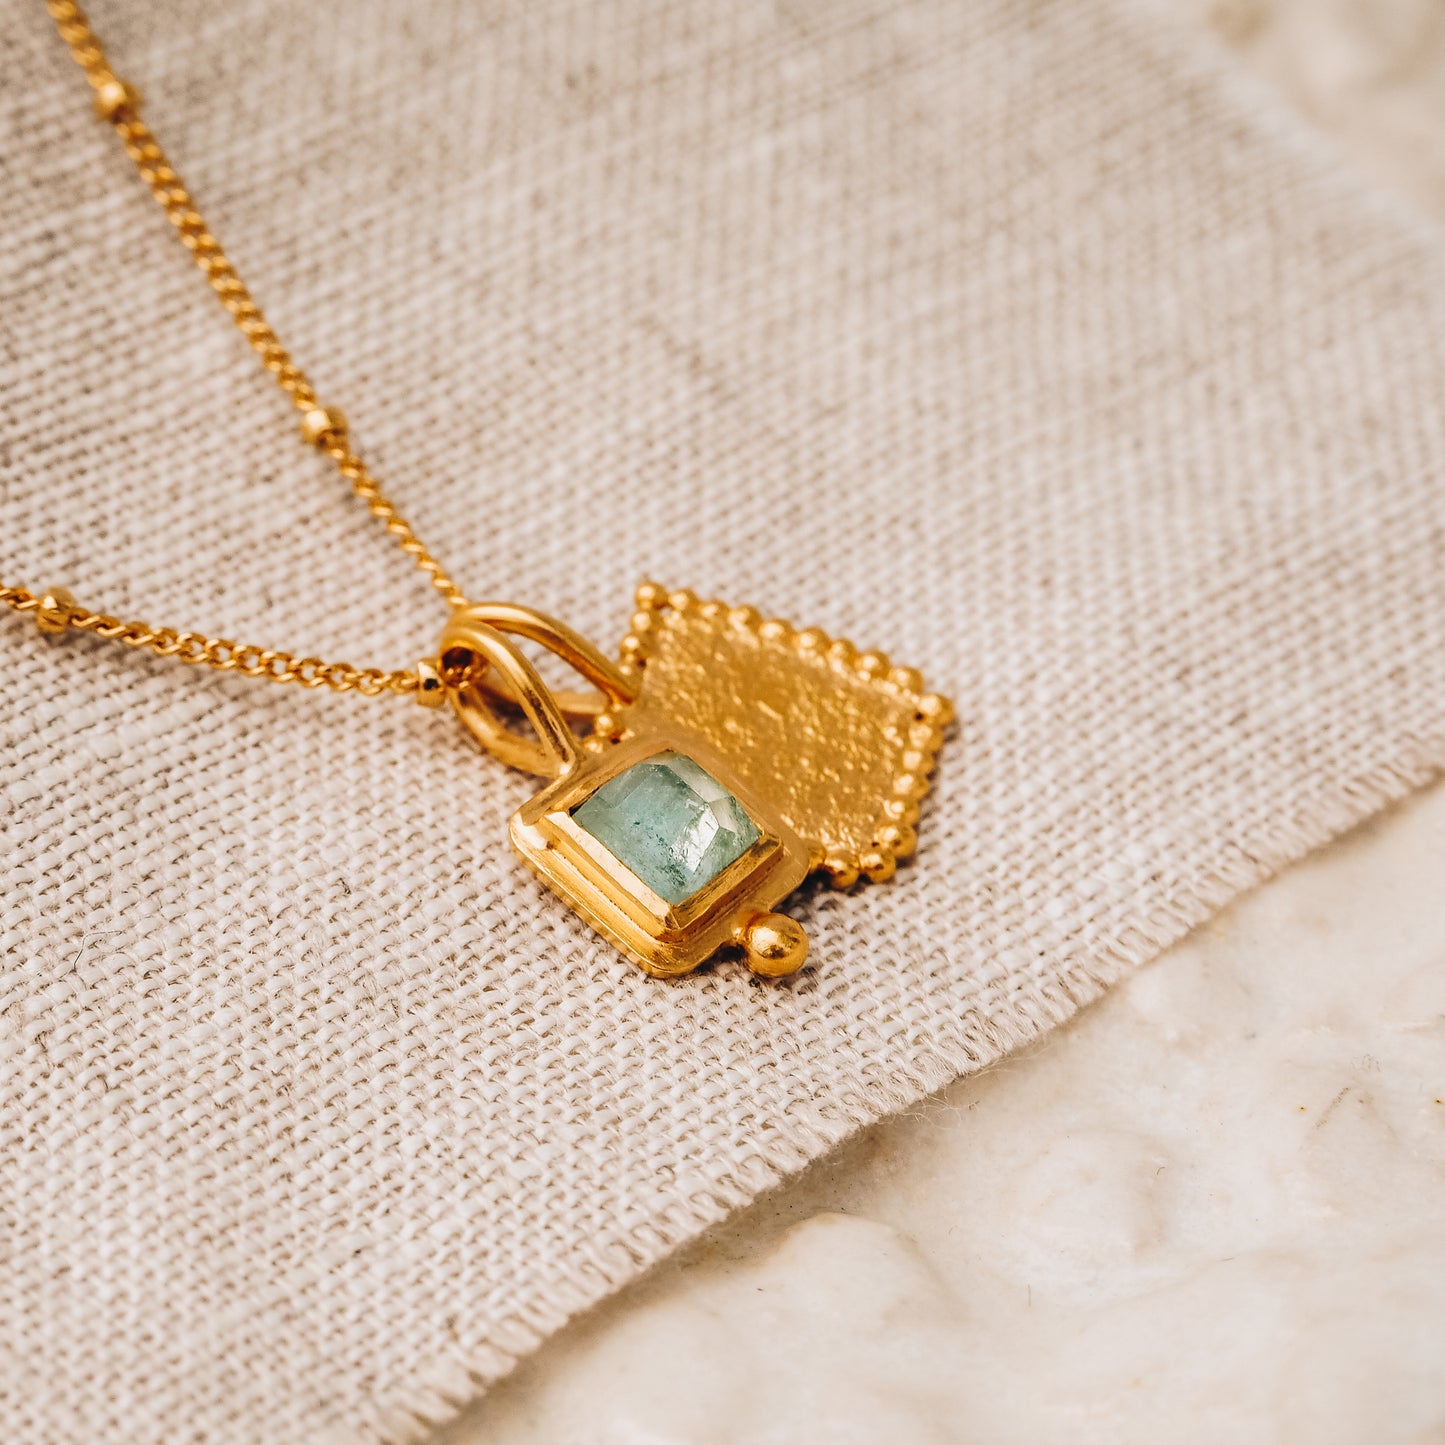 Elegant square gold pendant with a stunning blue rose cut tourmaline gemstone and delicate granulation detail, hanging from a fine satellite chain.